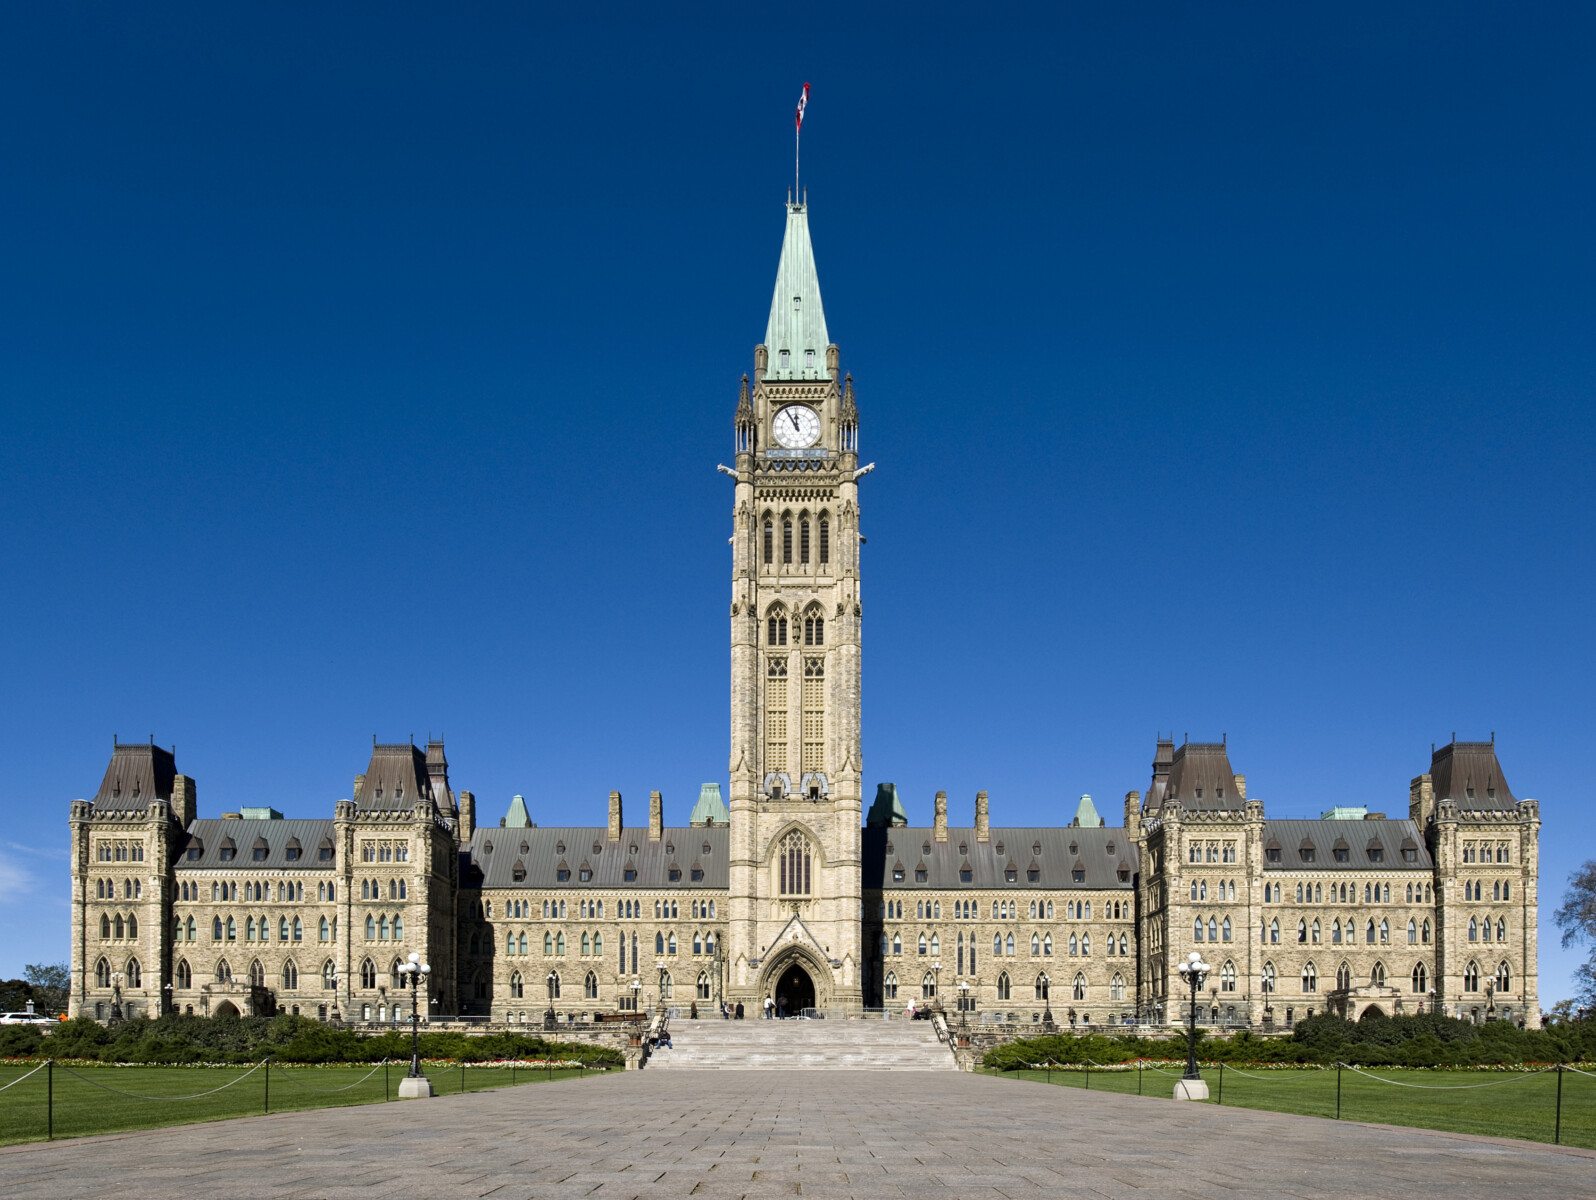 Centre Block Parliament Hill By Saffron Blaze - Own work, CC BY-SA 3.0, https://commons.wikimedia.org/w/index.php?curid=28678264